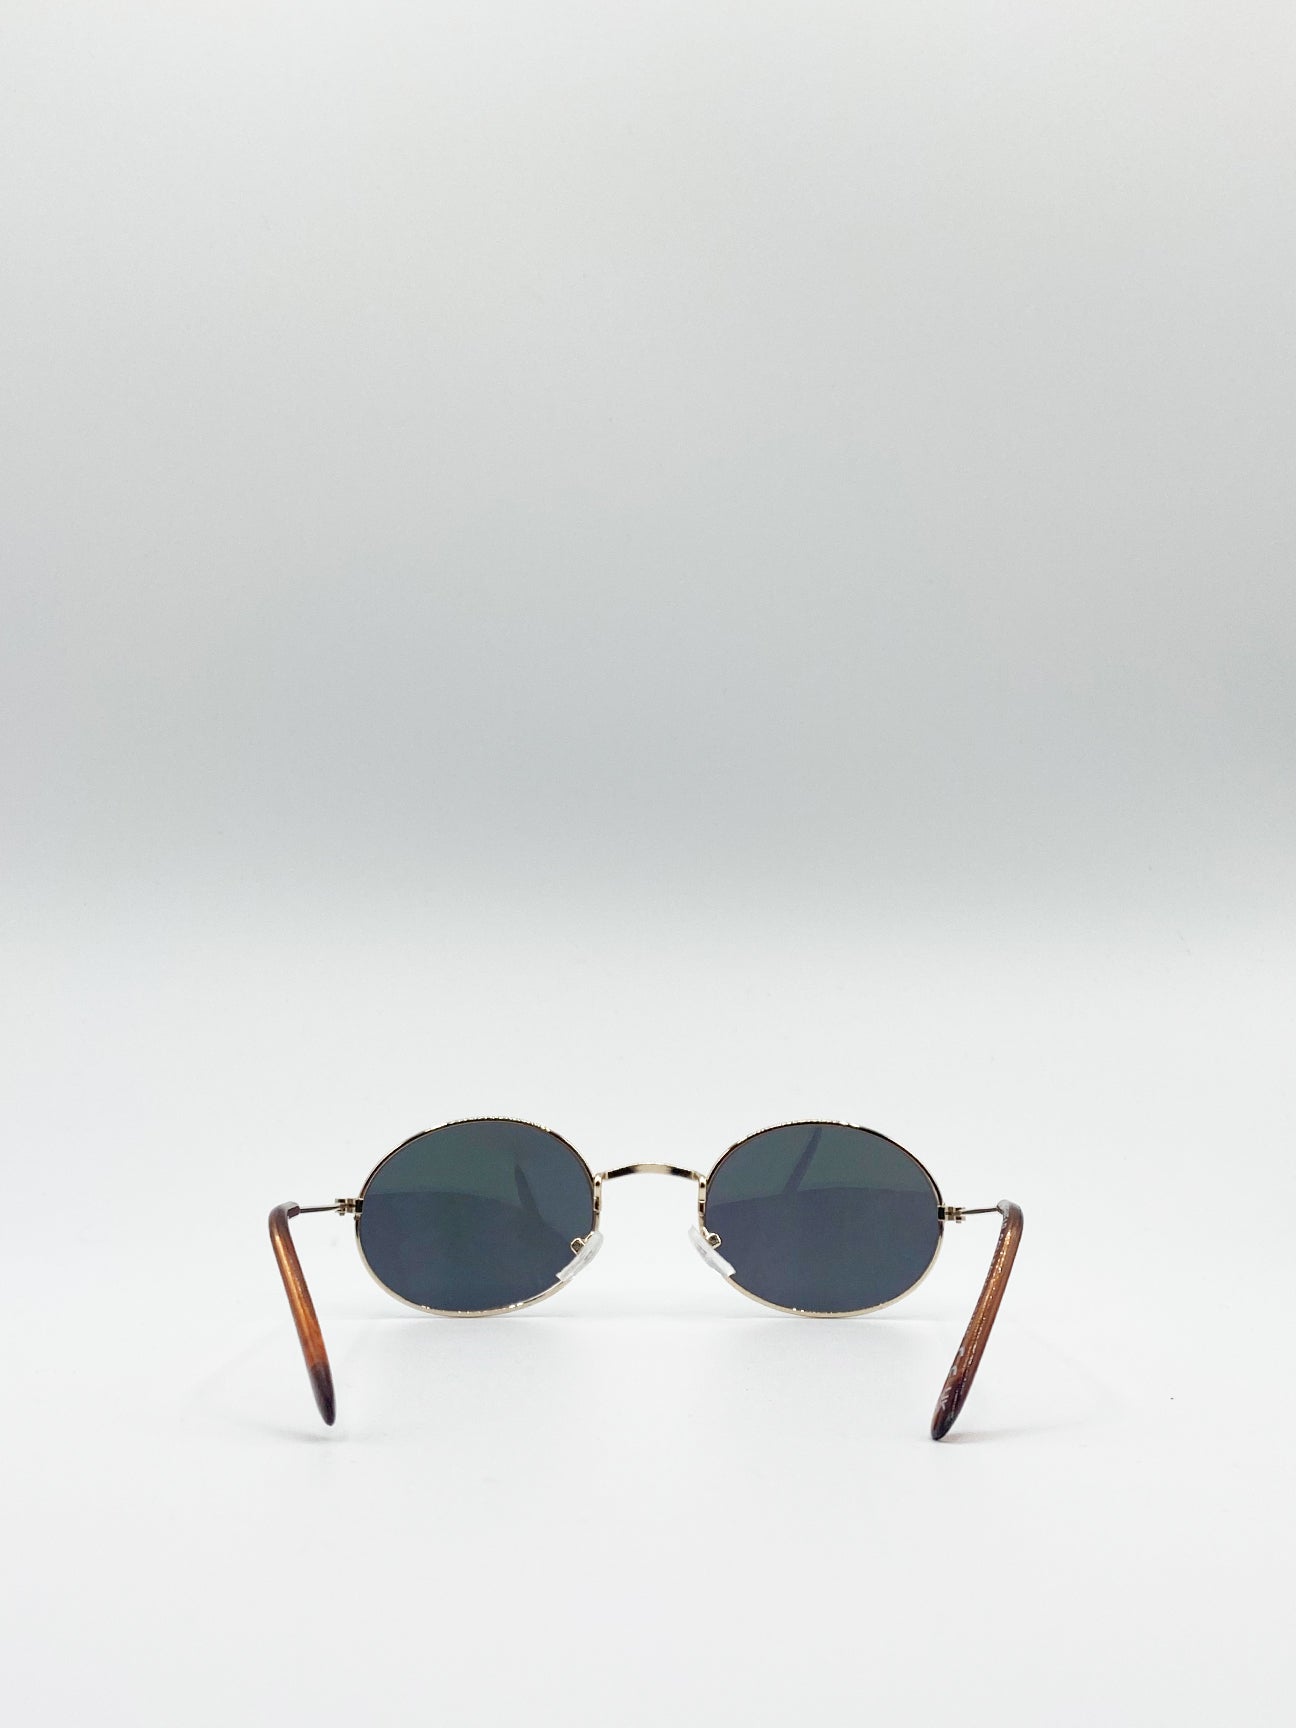 Gold Classic Round Sunglasses with Green Revo Lenses